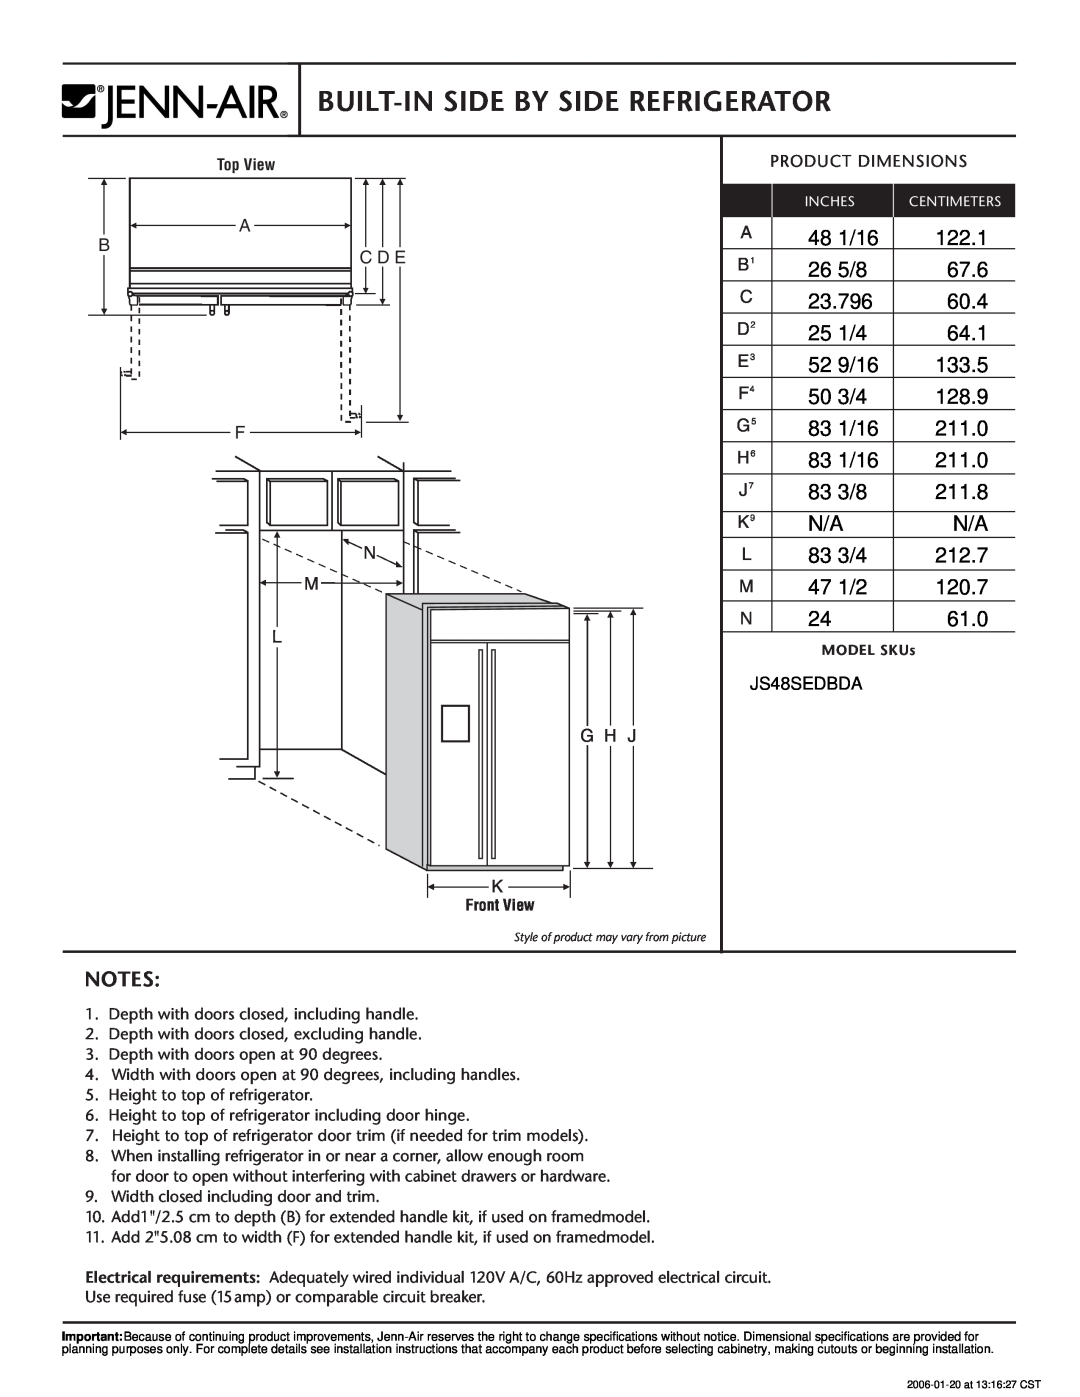 Jenn-Air JS48SEDBDA dimensions Built-In Side By Side Refrigerator, Product Dimensions 